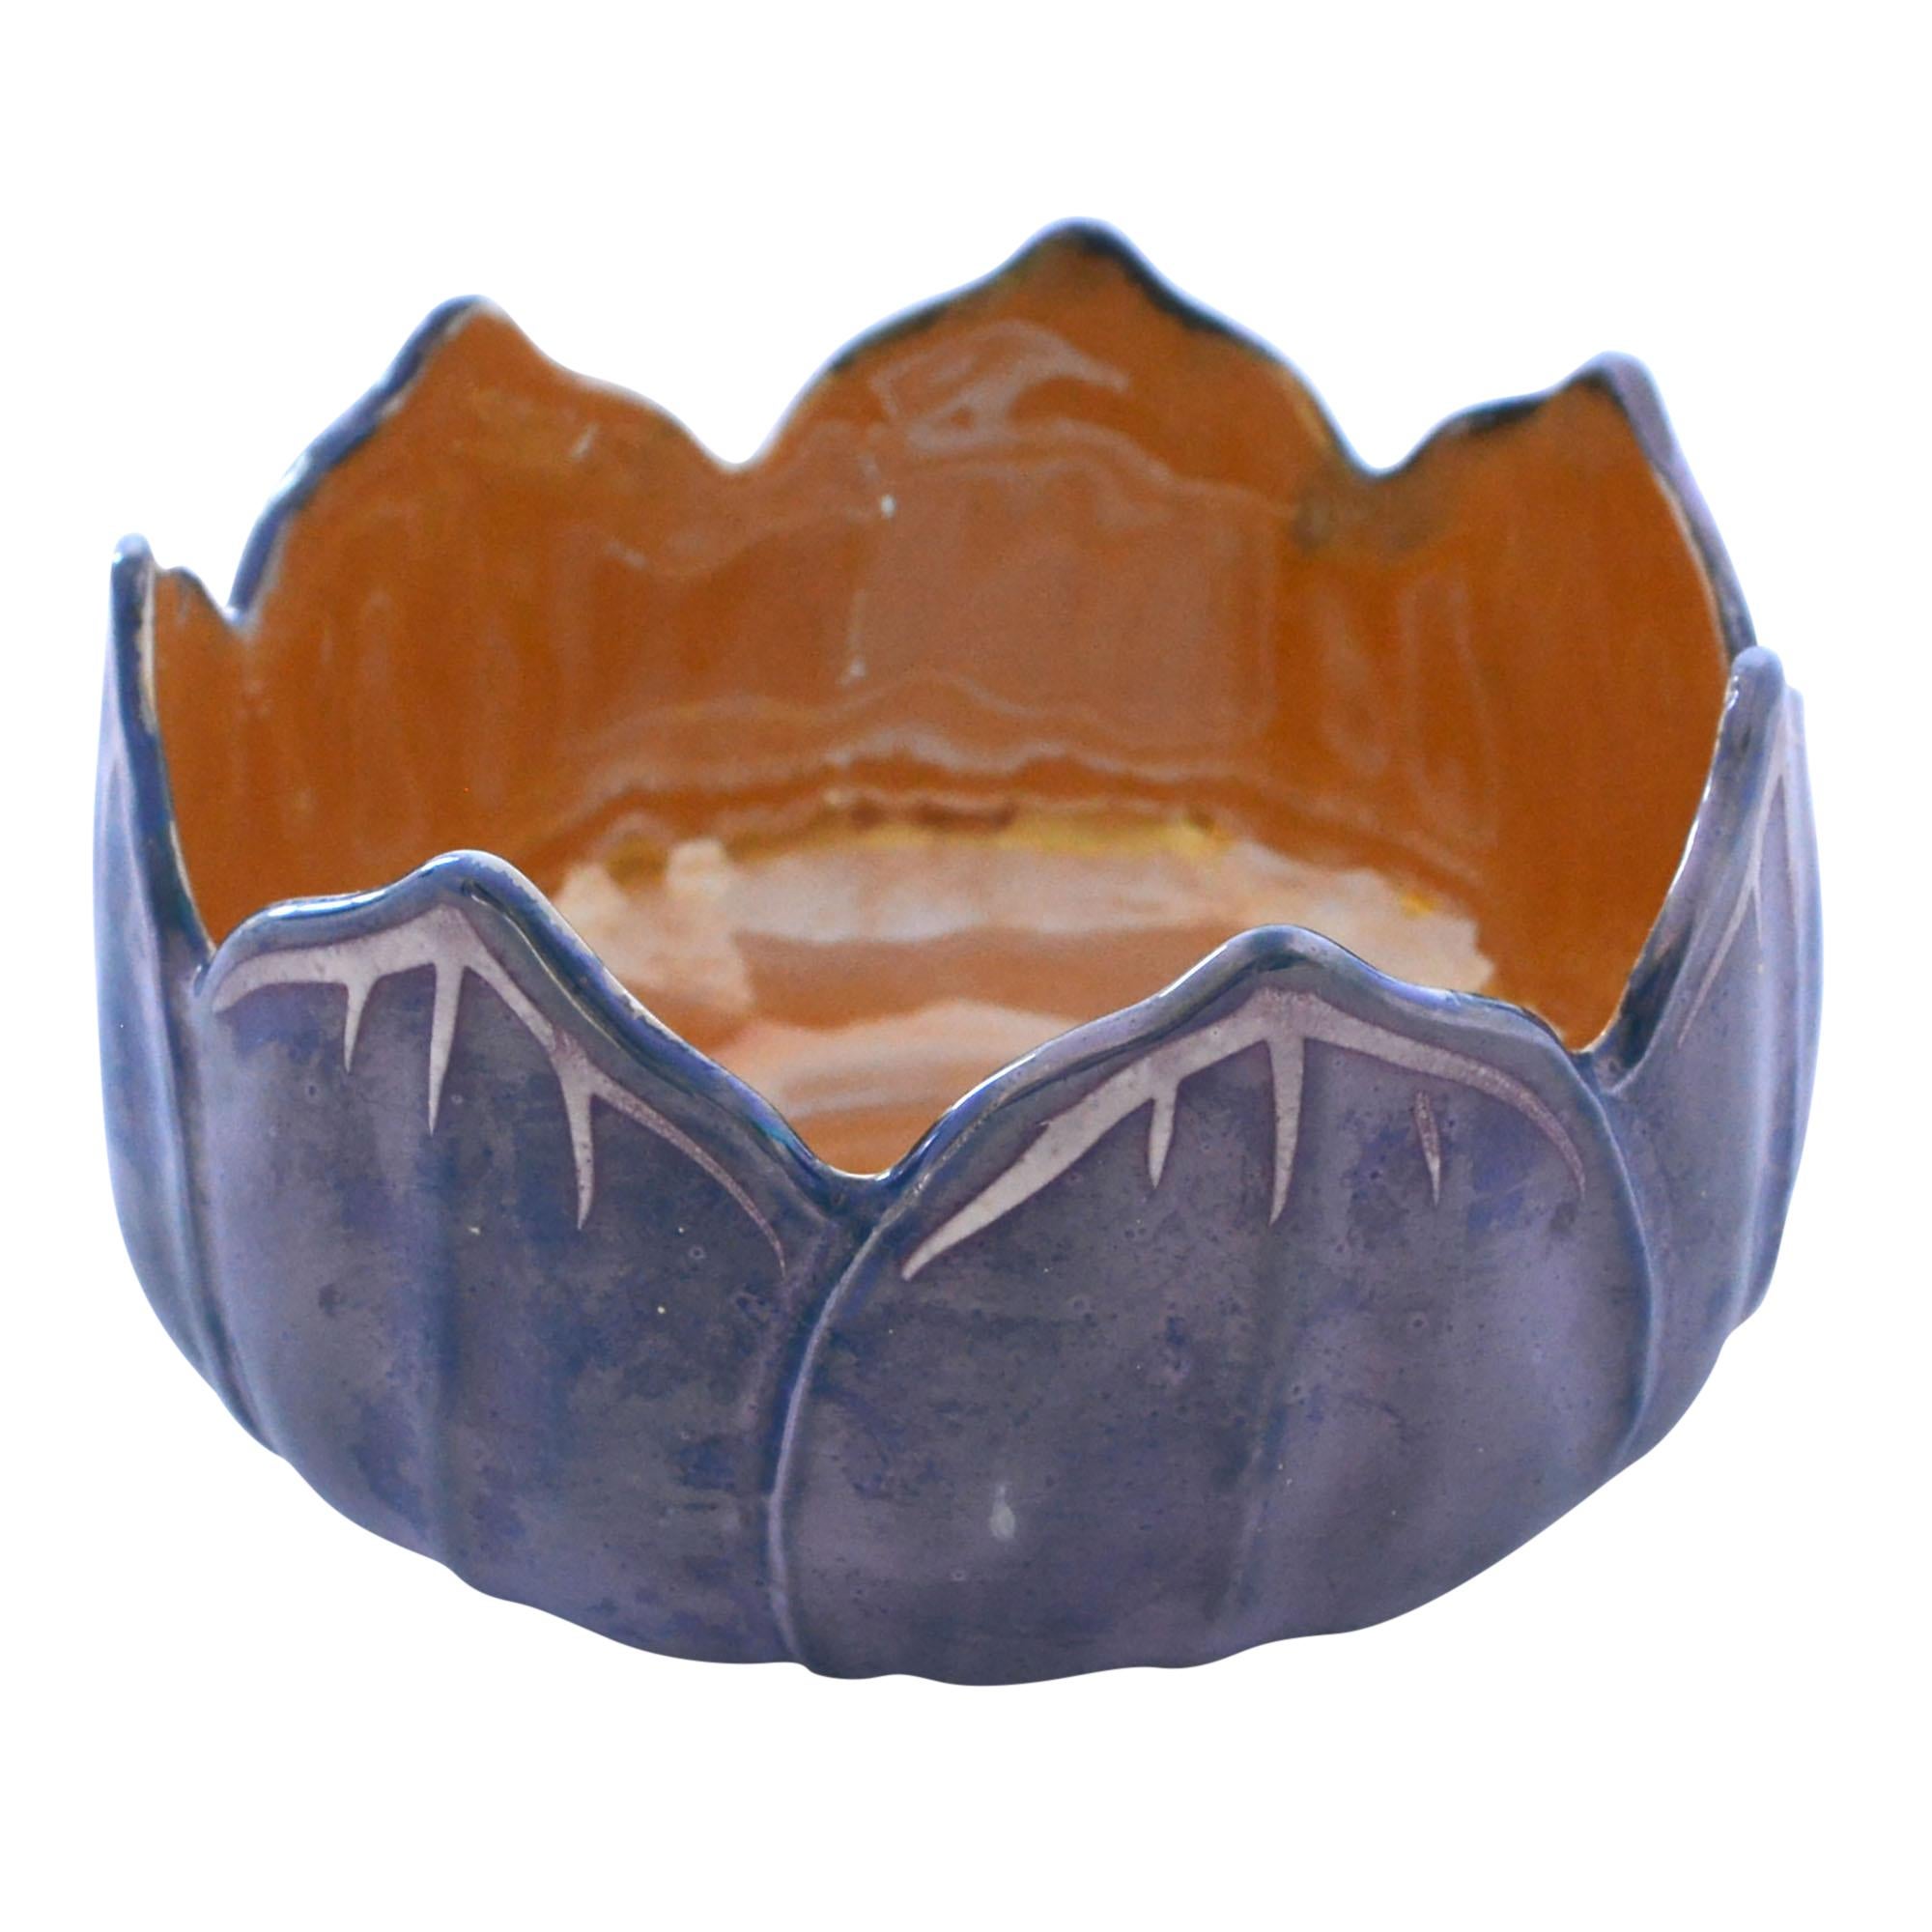 Lovely hand painted lusterware bowl is formed in the shape of lotus leaves. The inner bowl is finished in orange while the outer bowl is a beautiful lusterware blue with hand painted white details lining the leaves. Made in Japan.